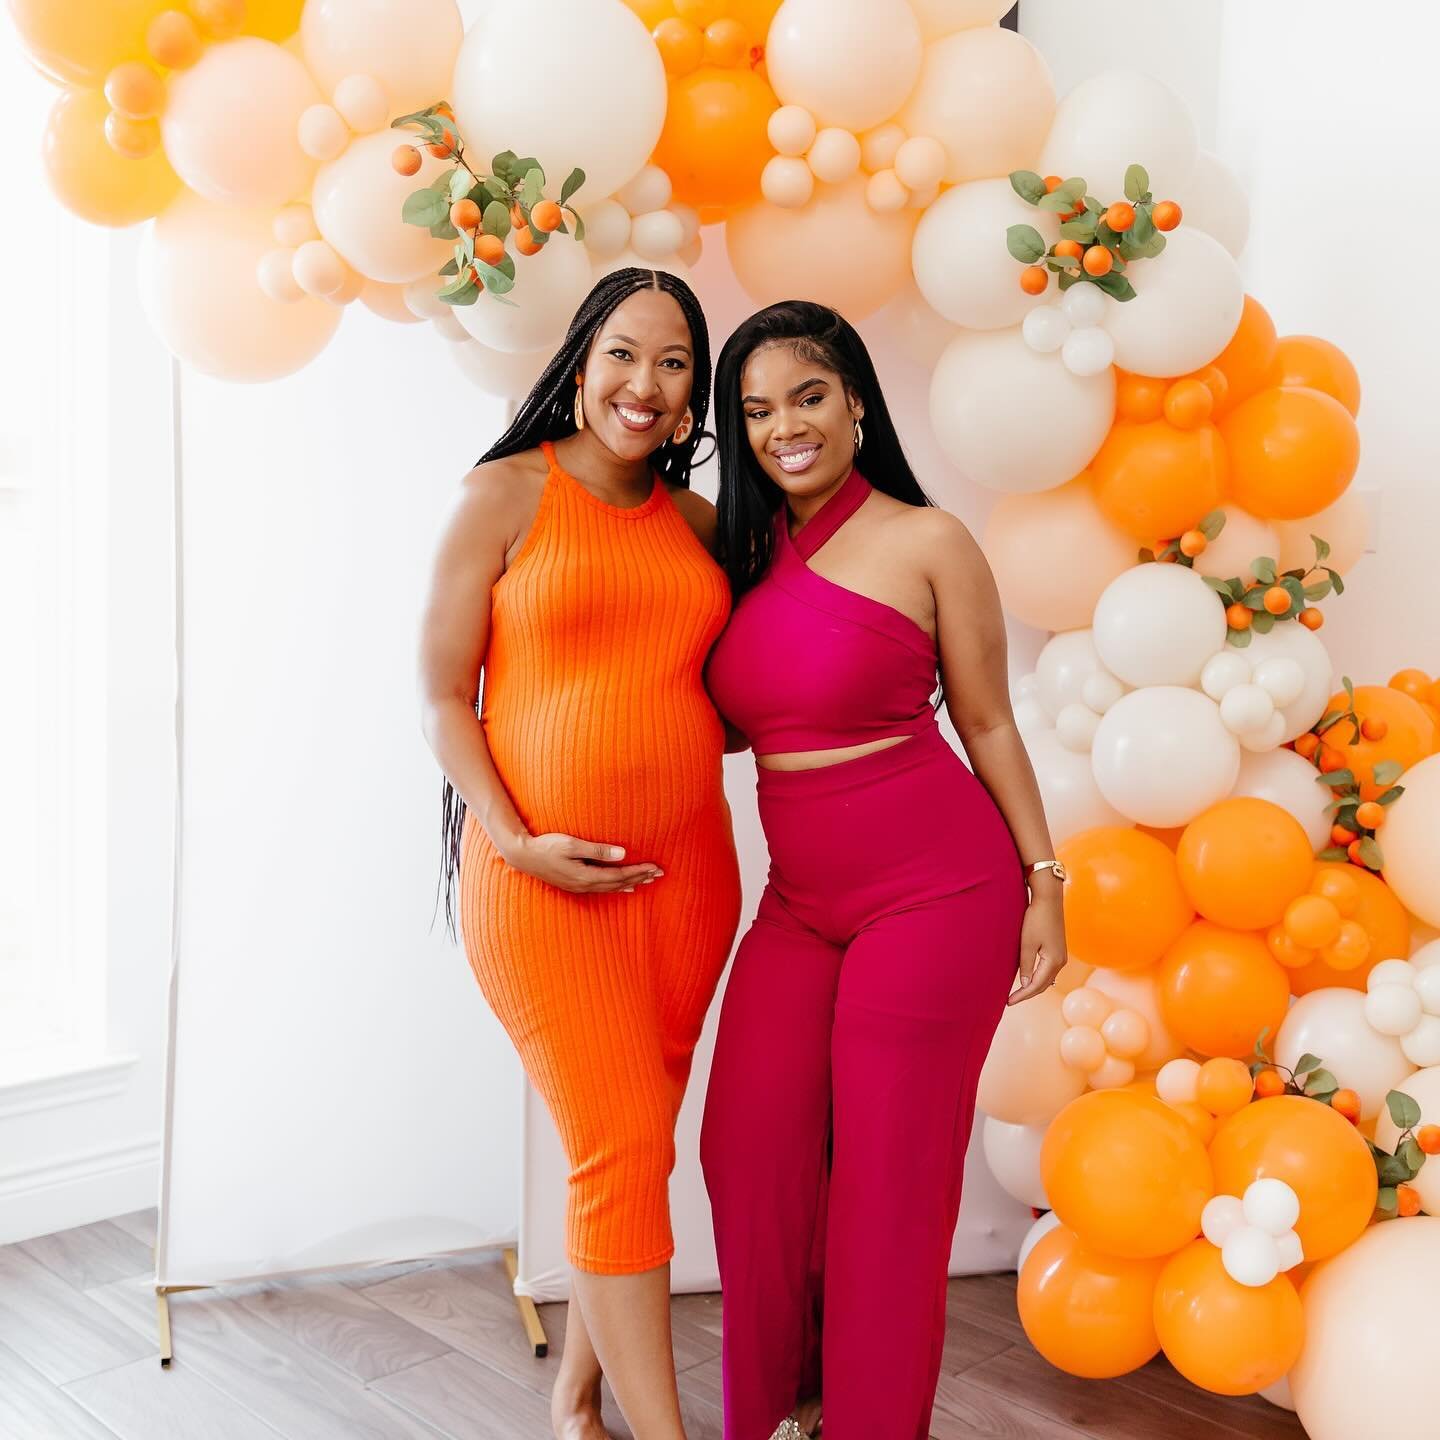 Two little cuties are on the way &amp; they are already so LOVED 🍊🍊

#twinpregnancy #twins #babyshower #blacklove

📸: @theretropenguin